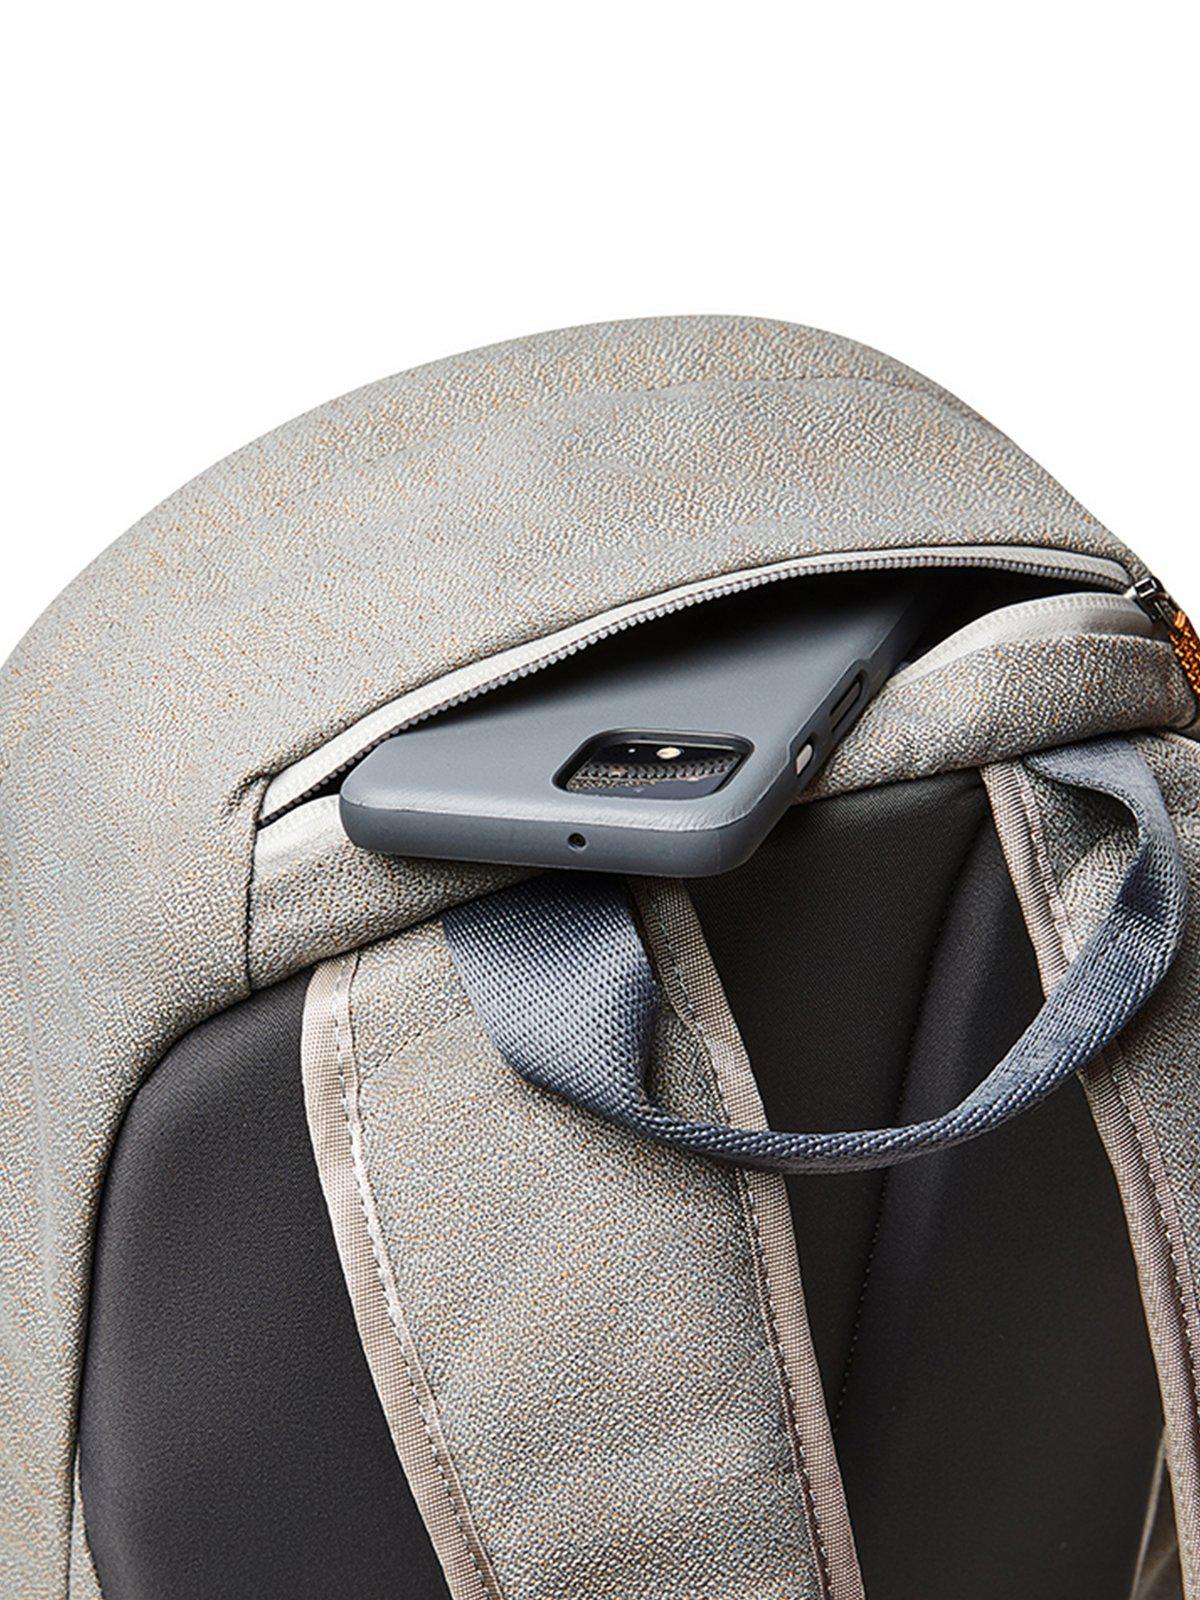 Bellroy Classic Backpack Limestone (Leather-Free)